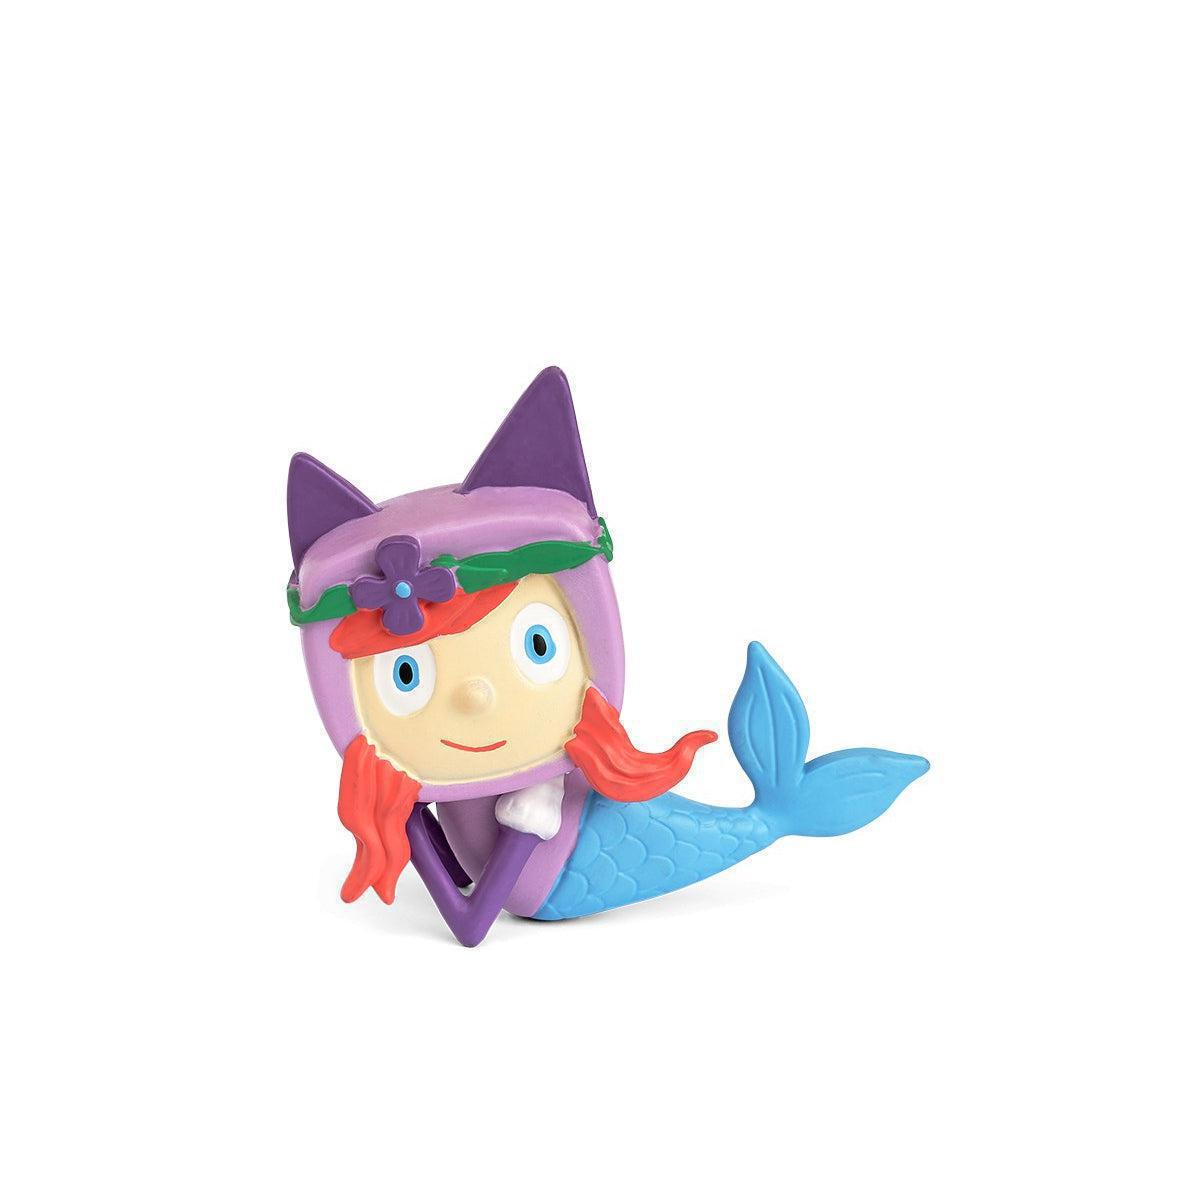 Creative Tonie Mermaid - Audio Character for use with Toniebox Player with Space for up to 90 Minutes of Customisable Content